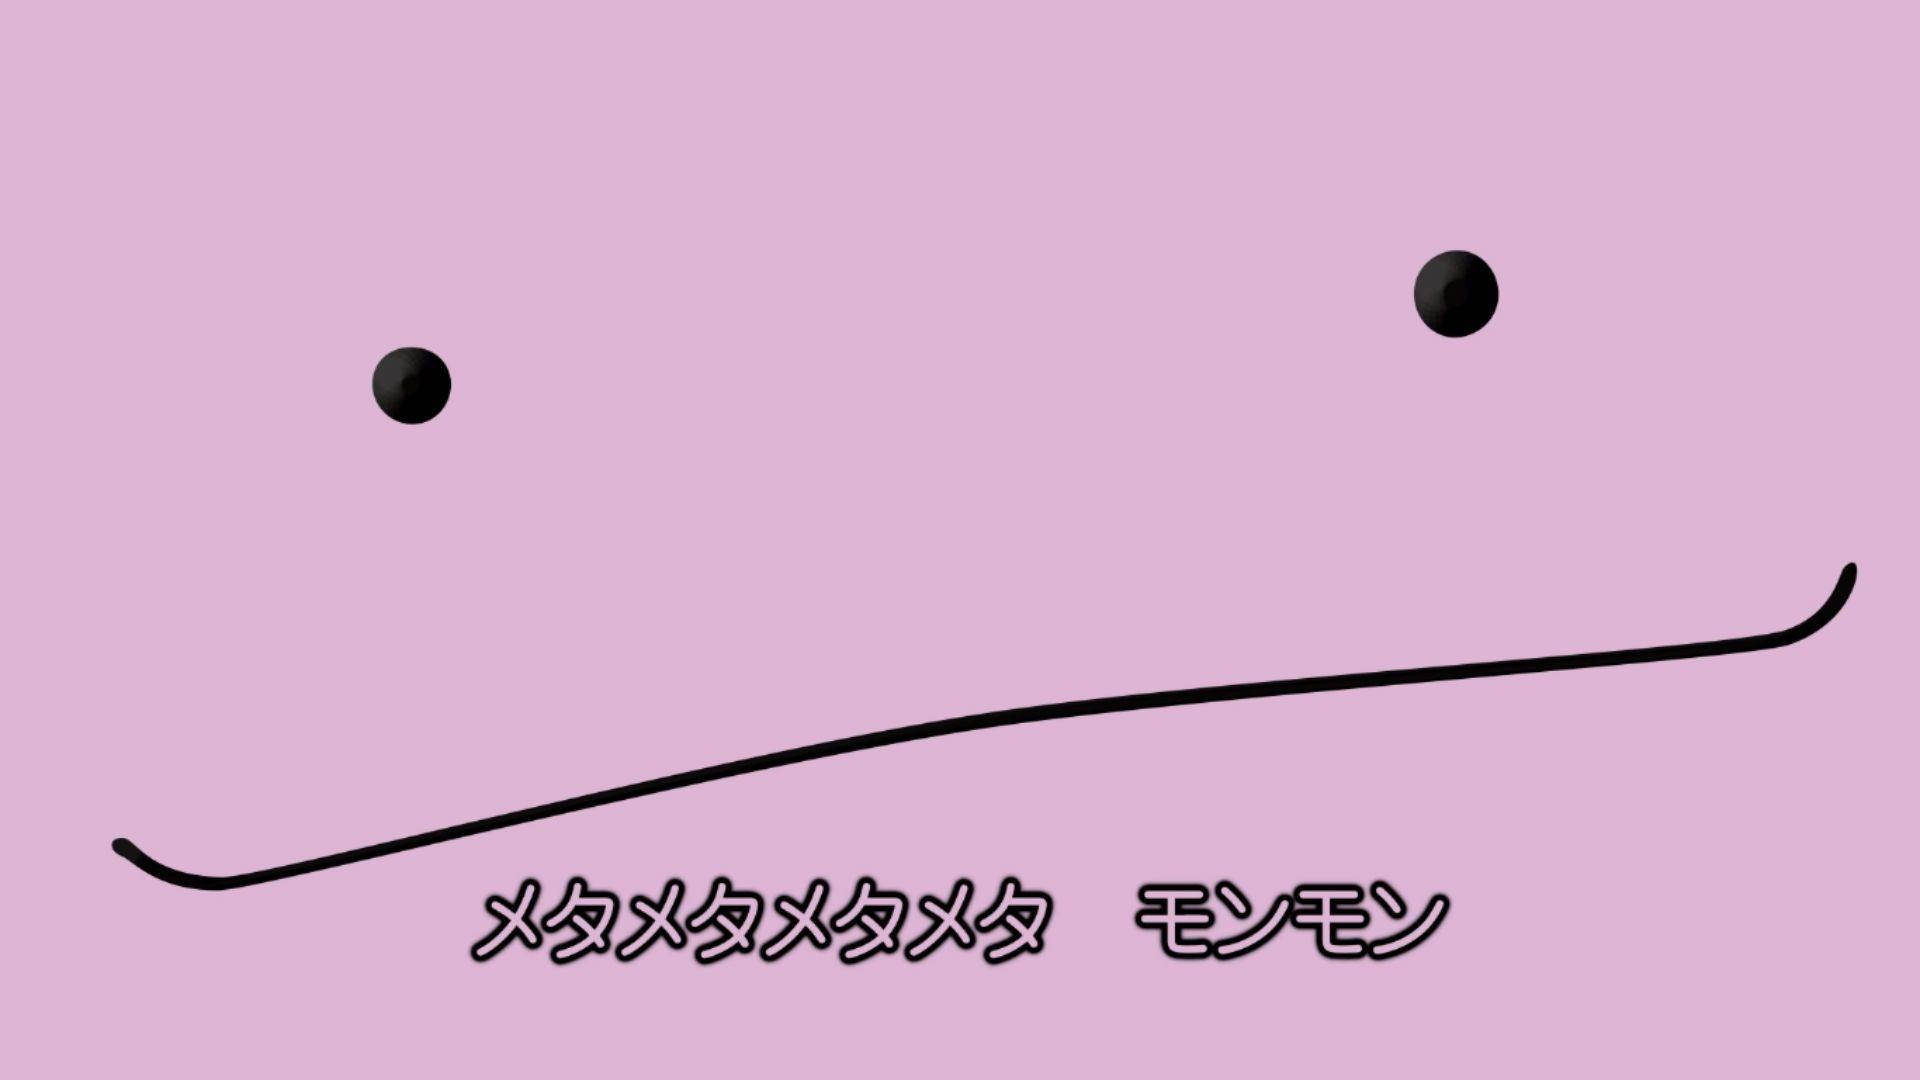 Ditto With Japanese Subtitles Wallpaper